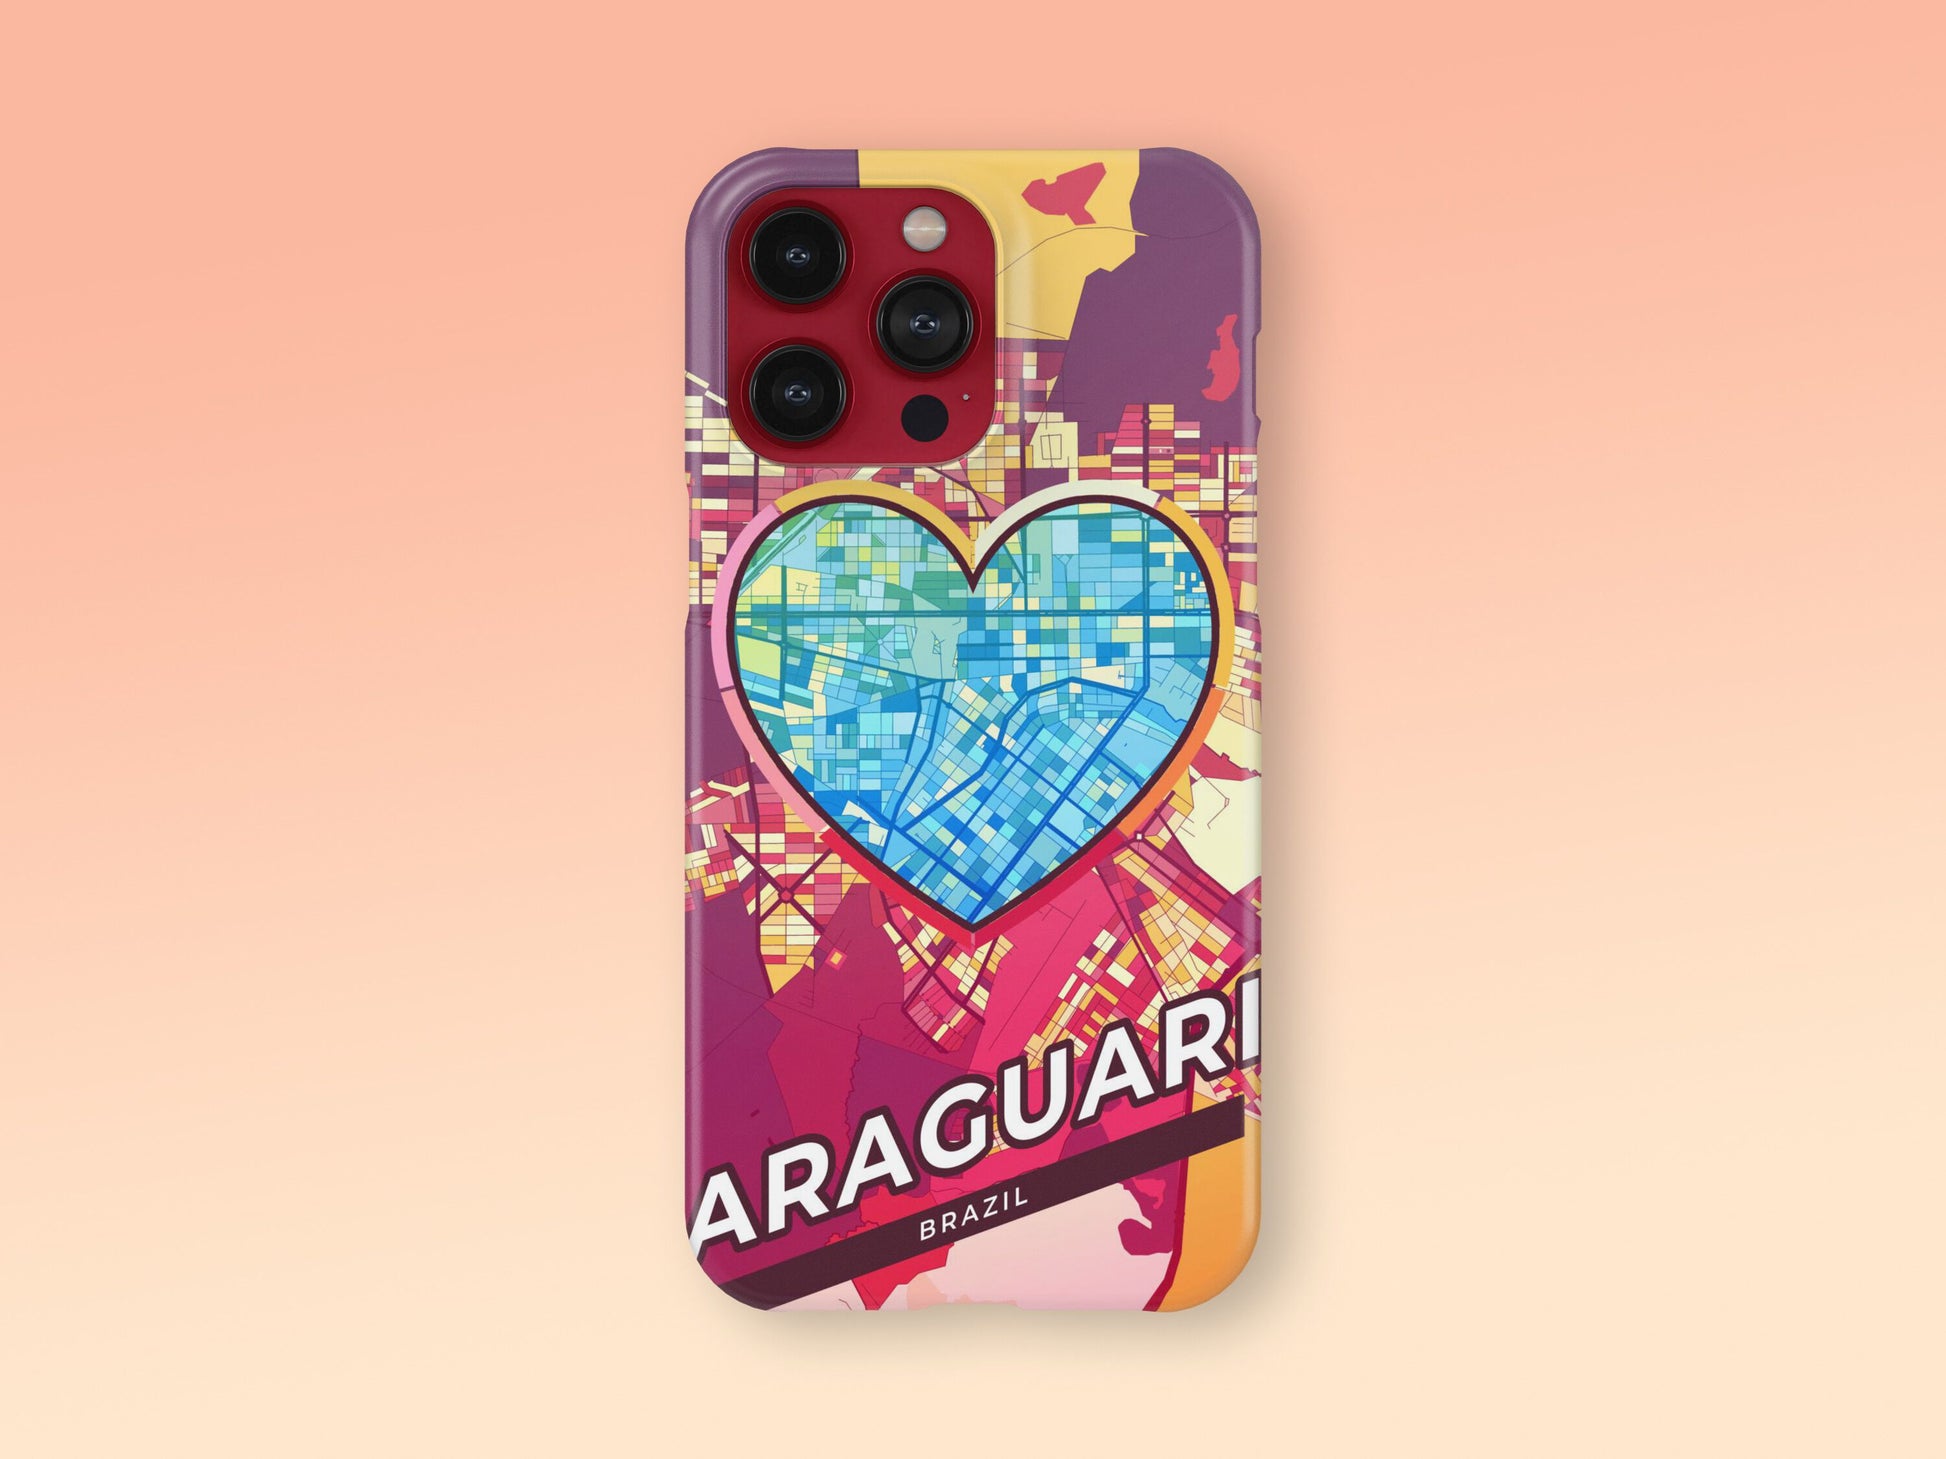 Araguari Brazil slim phone case with colorful icon. Birthday, wedding or housewarming gift. Couple match cases. 2